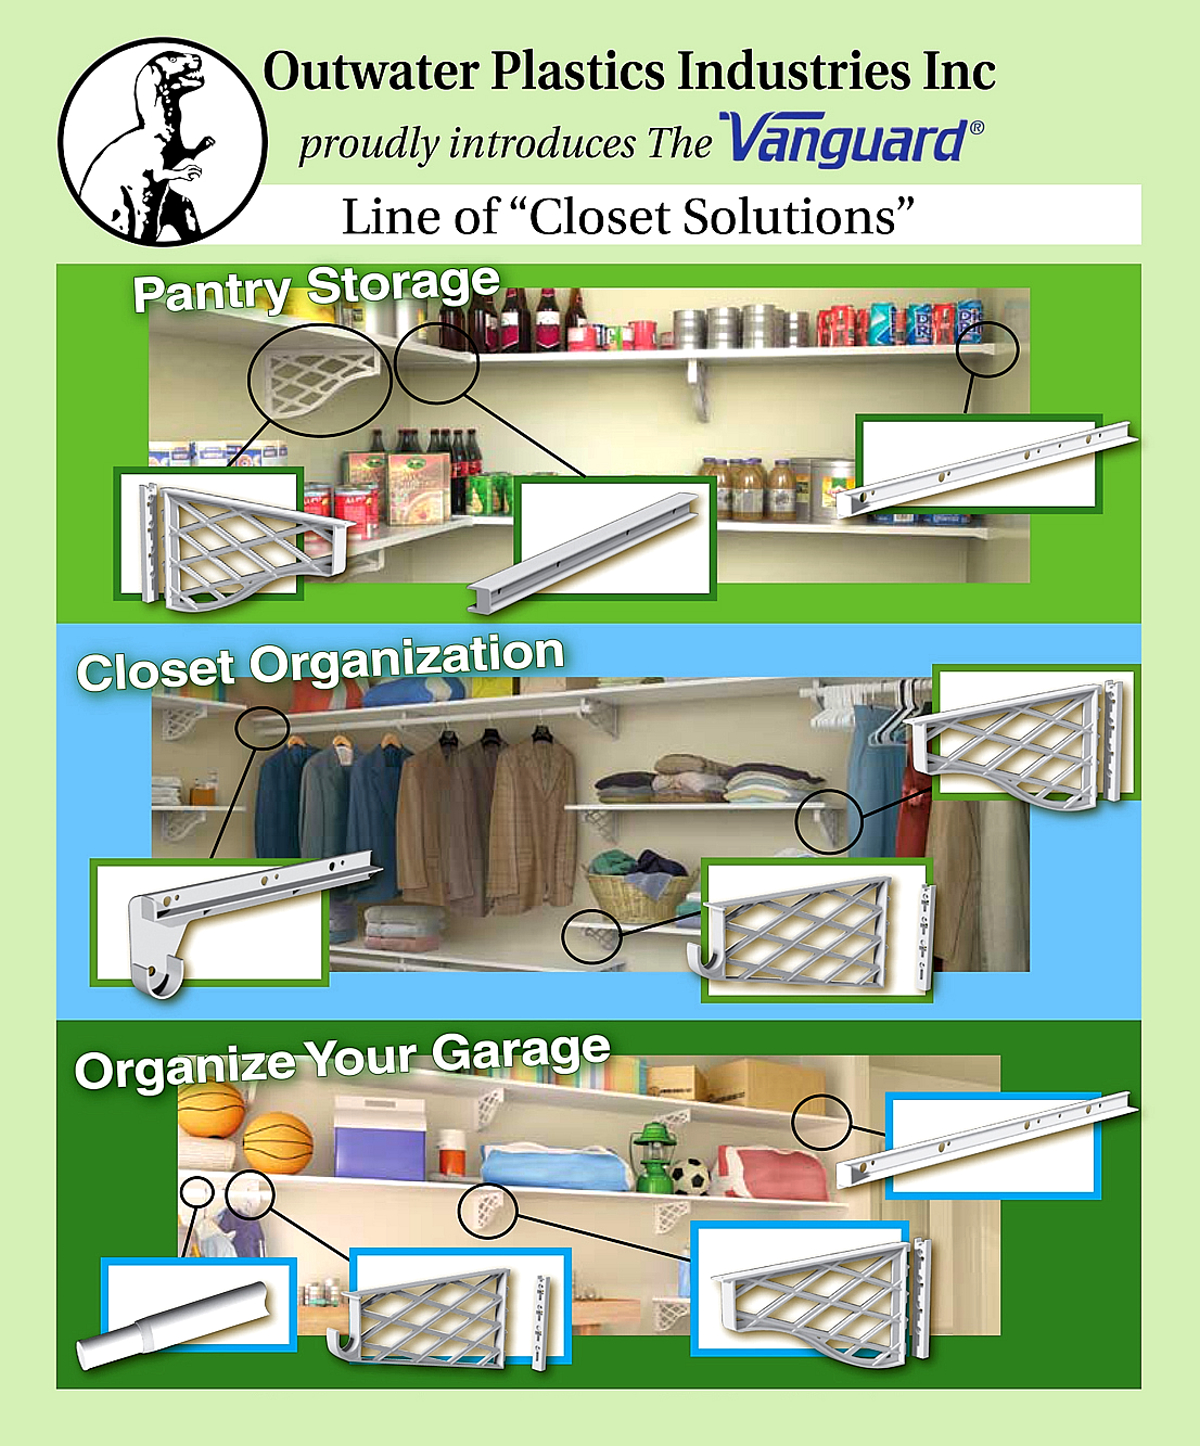 Vanguard “Closet, Pantry & Garage Solutions” by Outwater